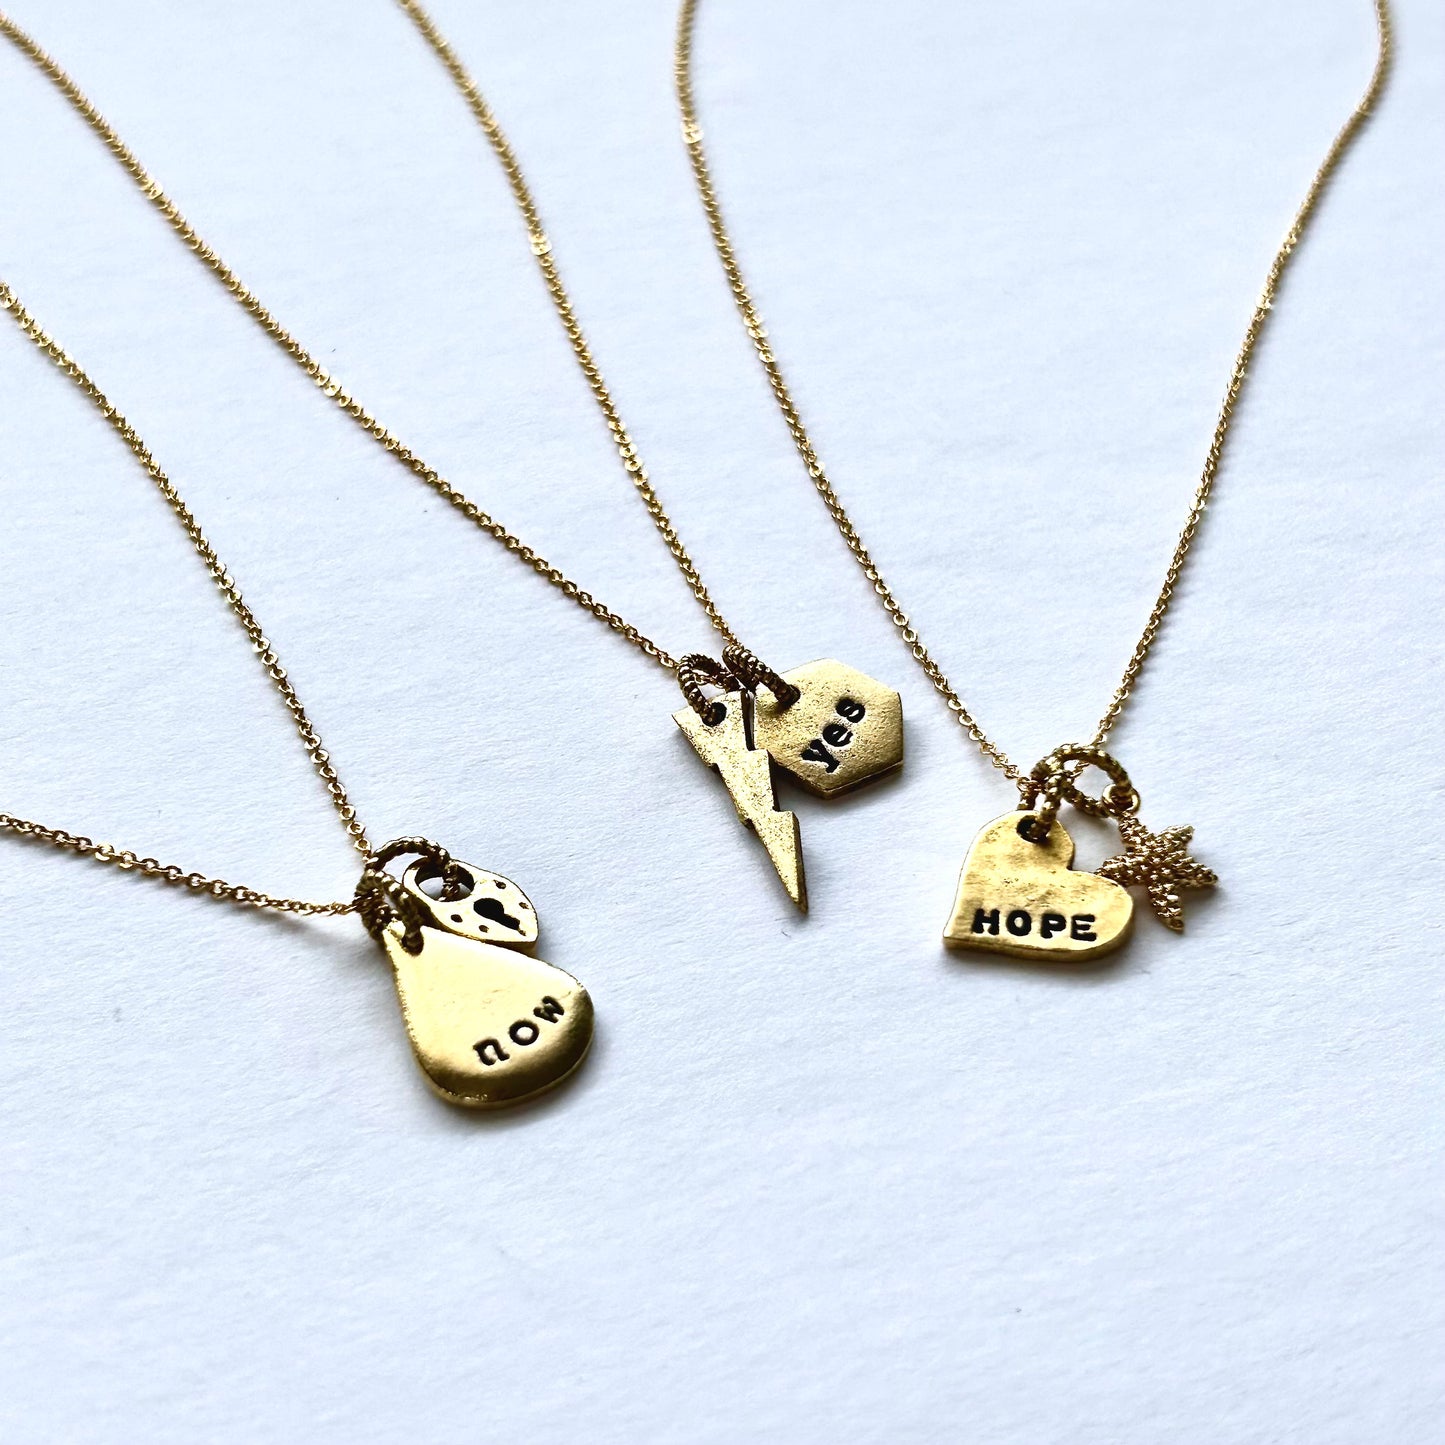 Heaven Inspired Soco Necklace - Gold